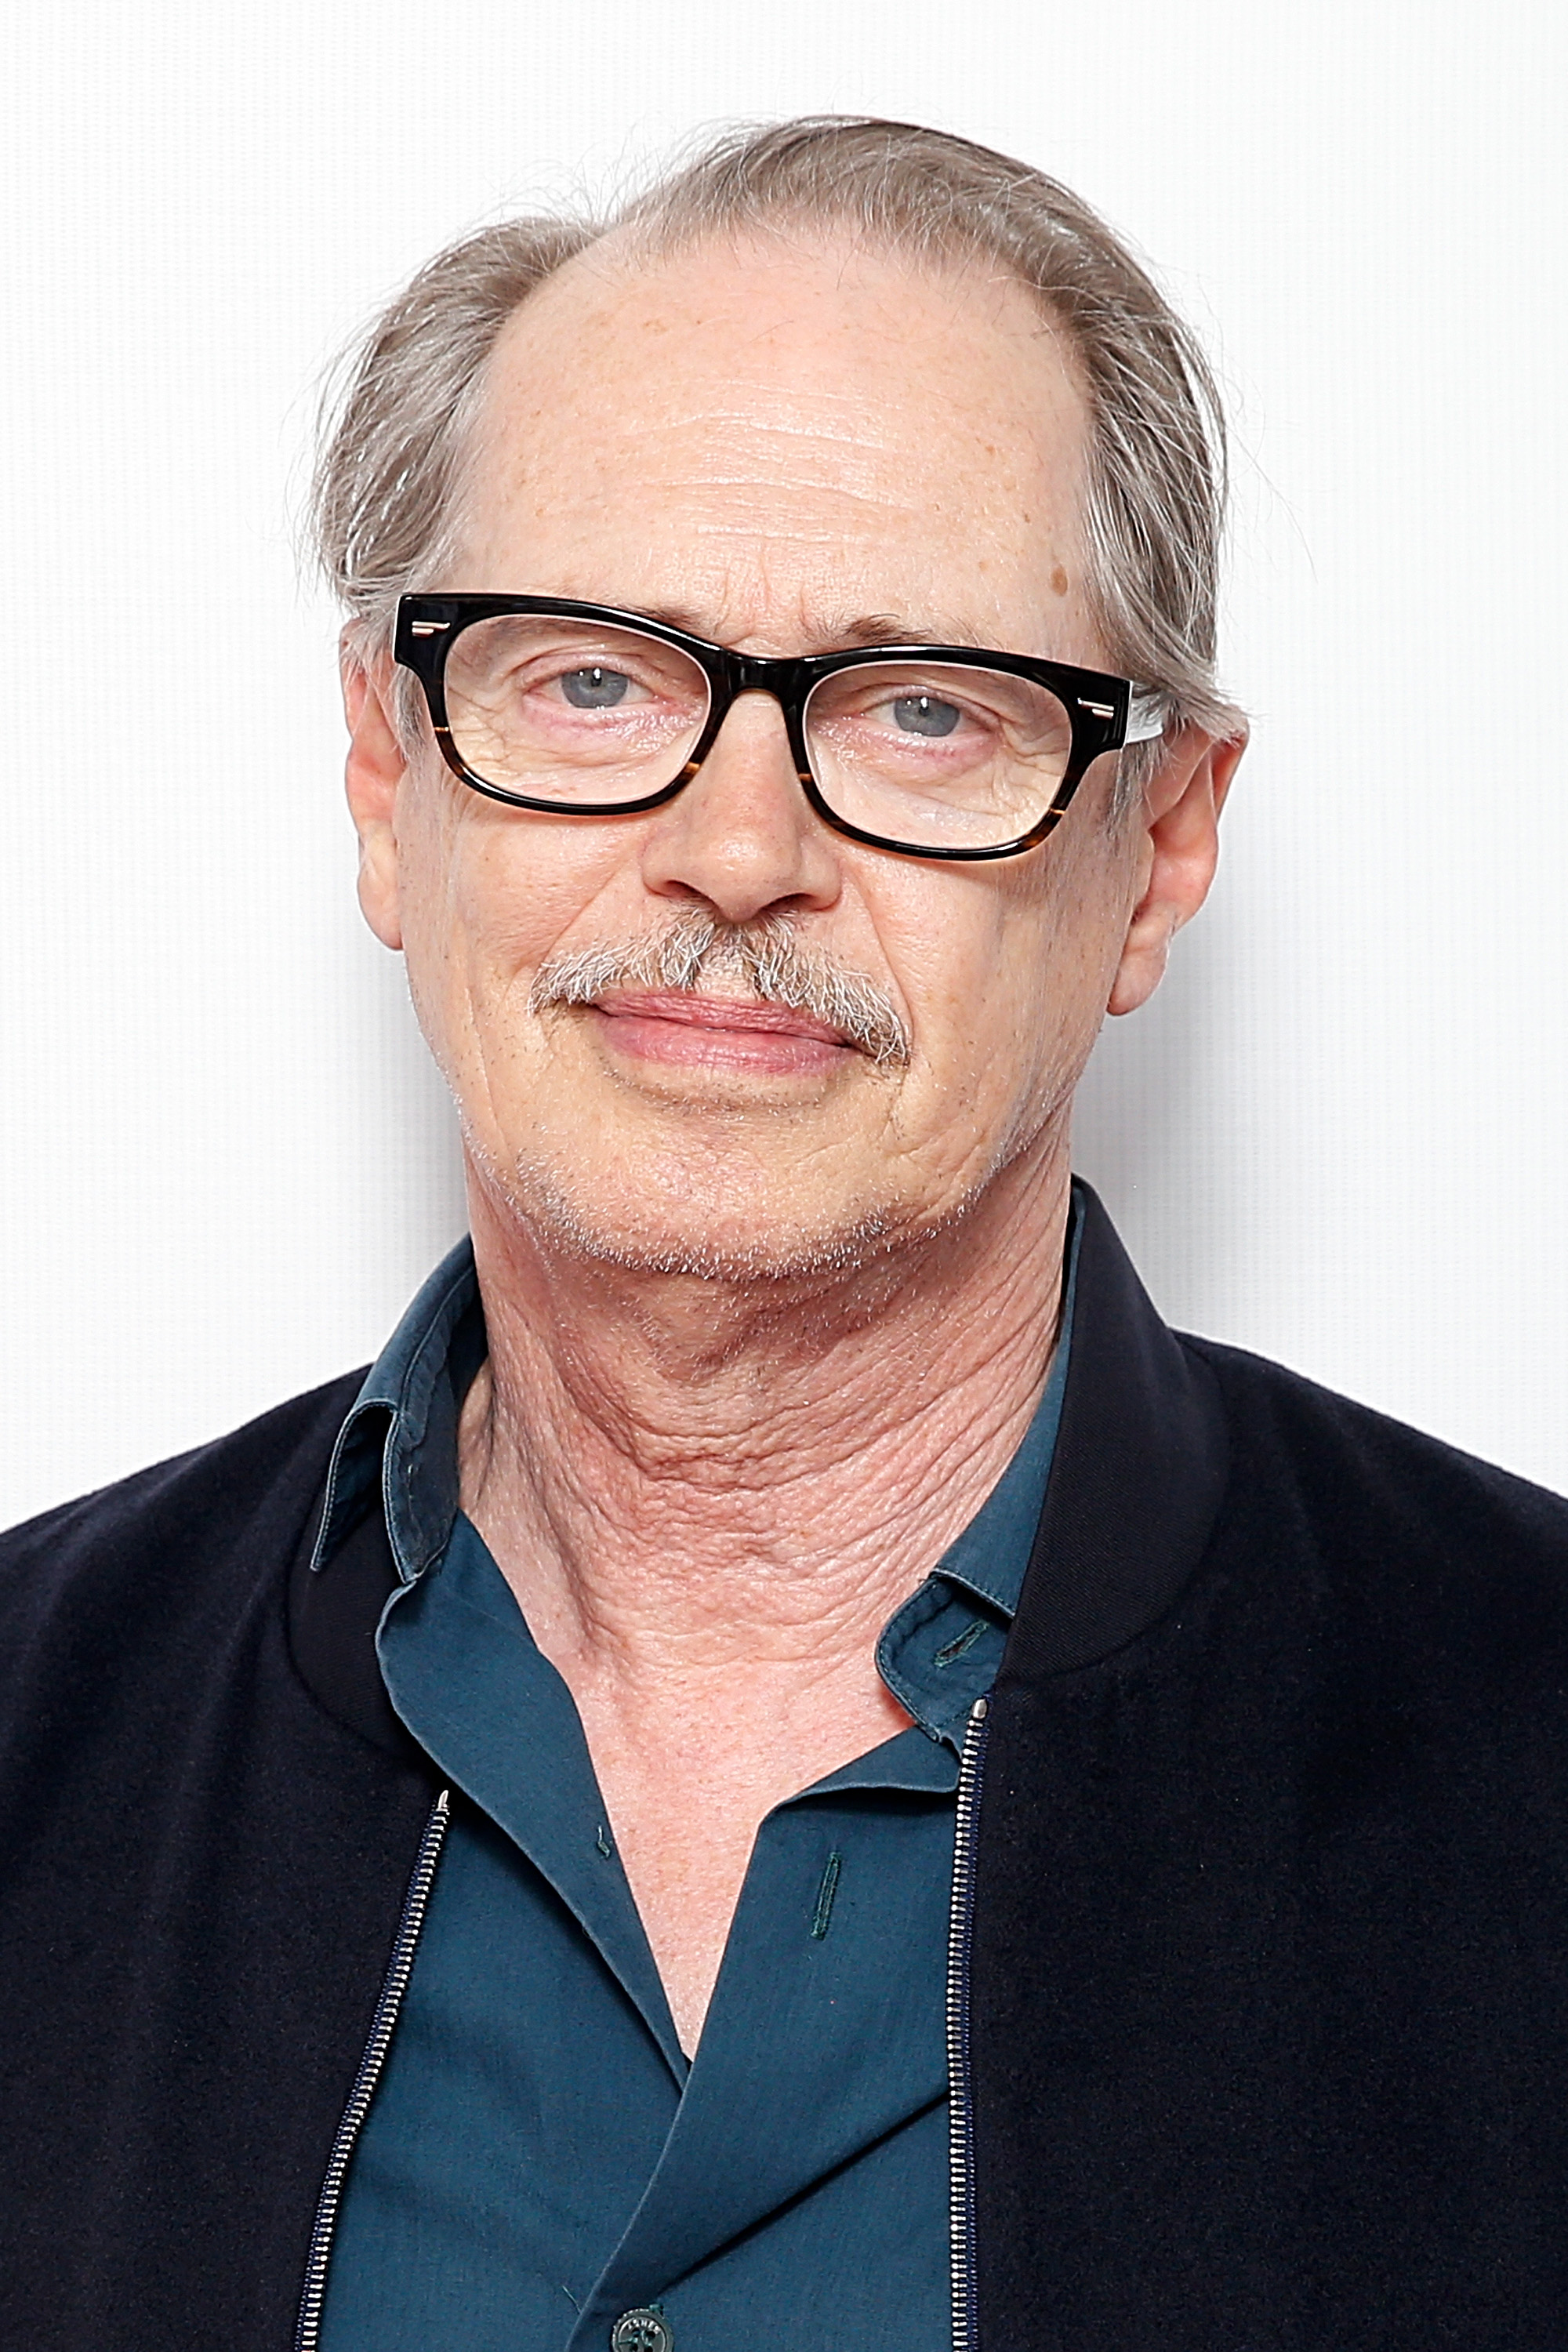 Actor Steve Buscemi attends "The Year Between" premiere during the 2022 Tribeca Festival at Village East Cinema on June 12, 2022 in New York City. | Source: Getty Images